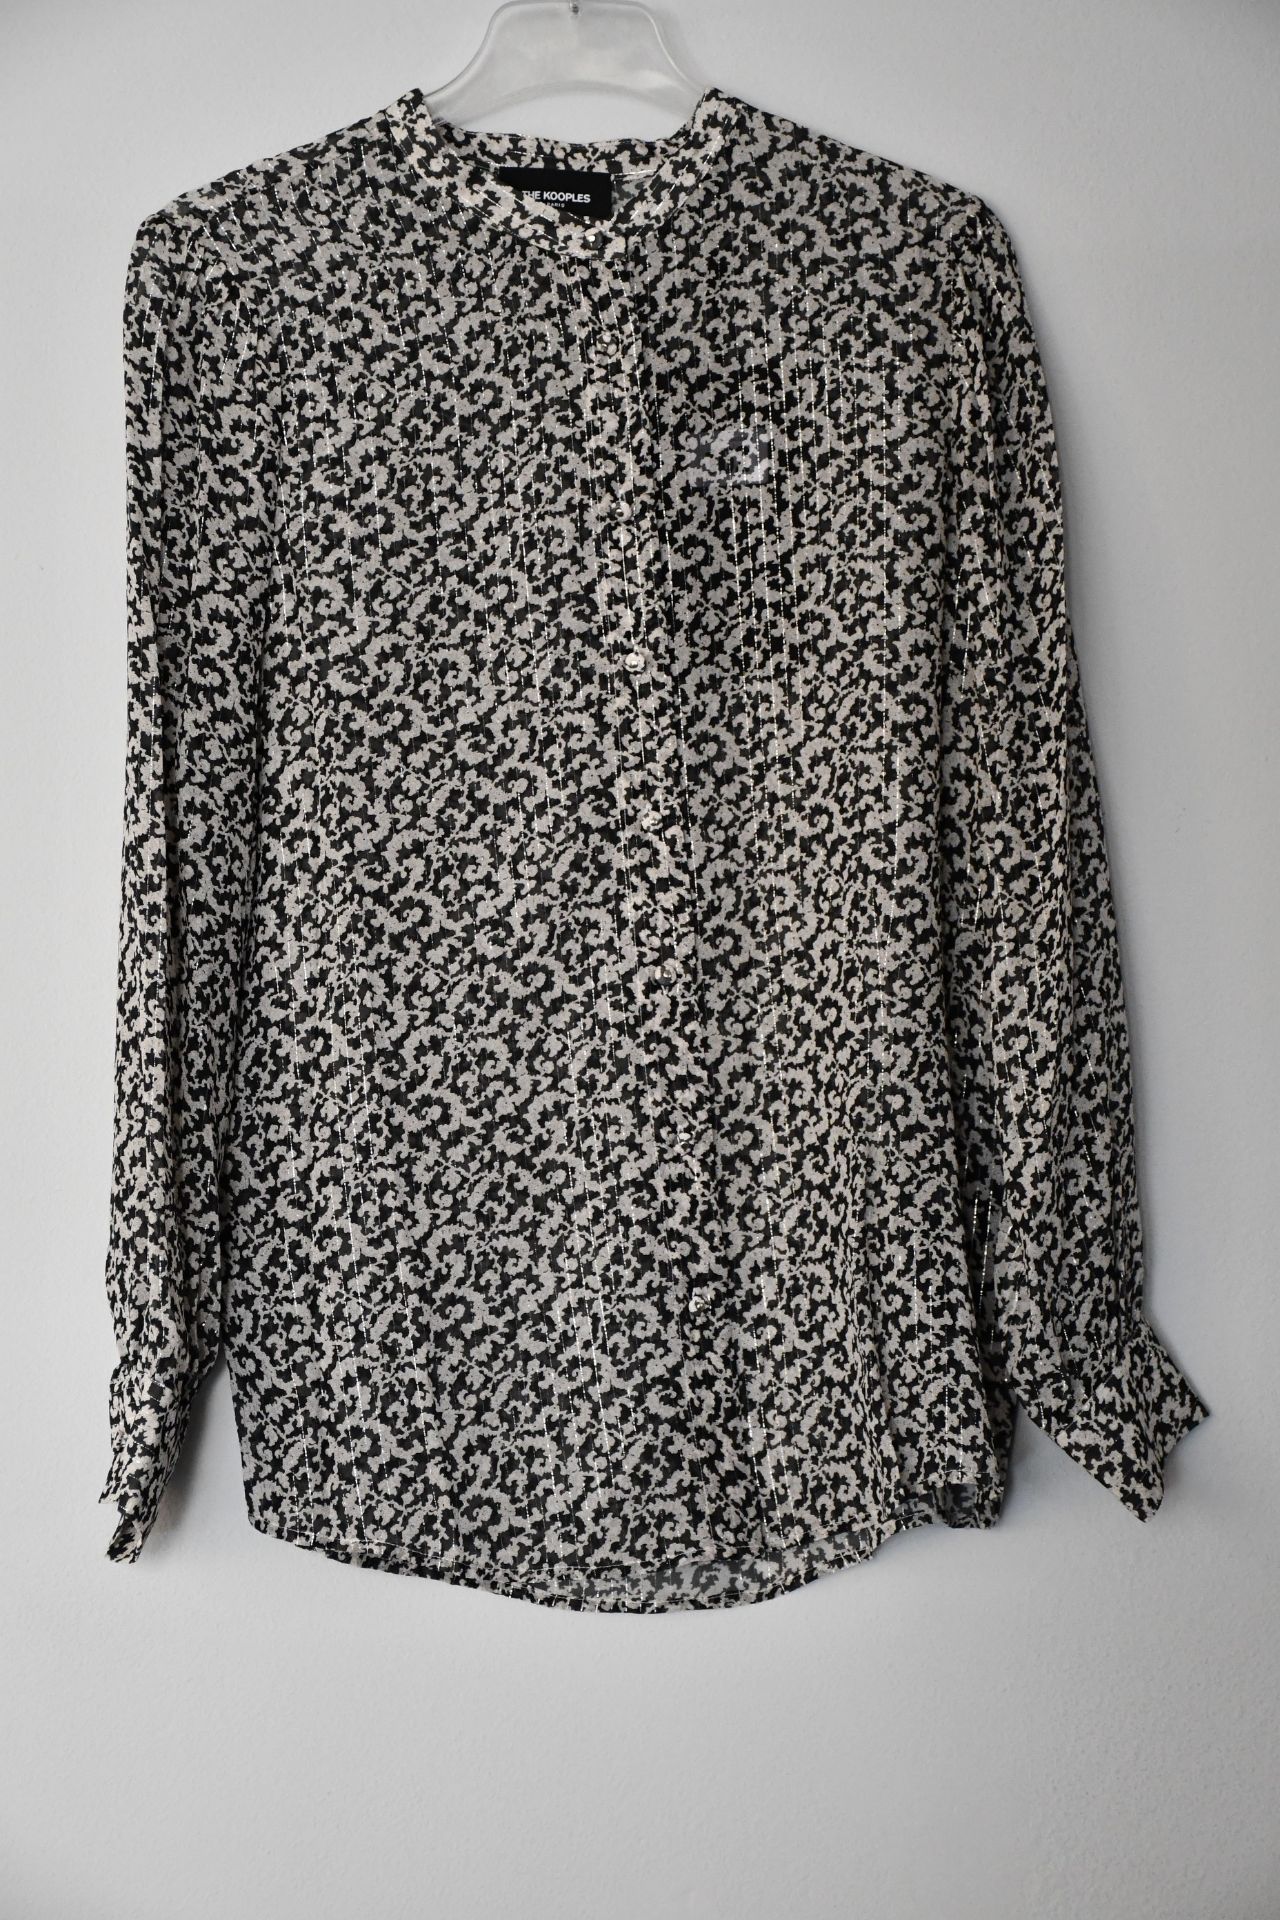 An as new The Kooples blouse (Size 0 - RRP €198).